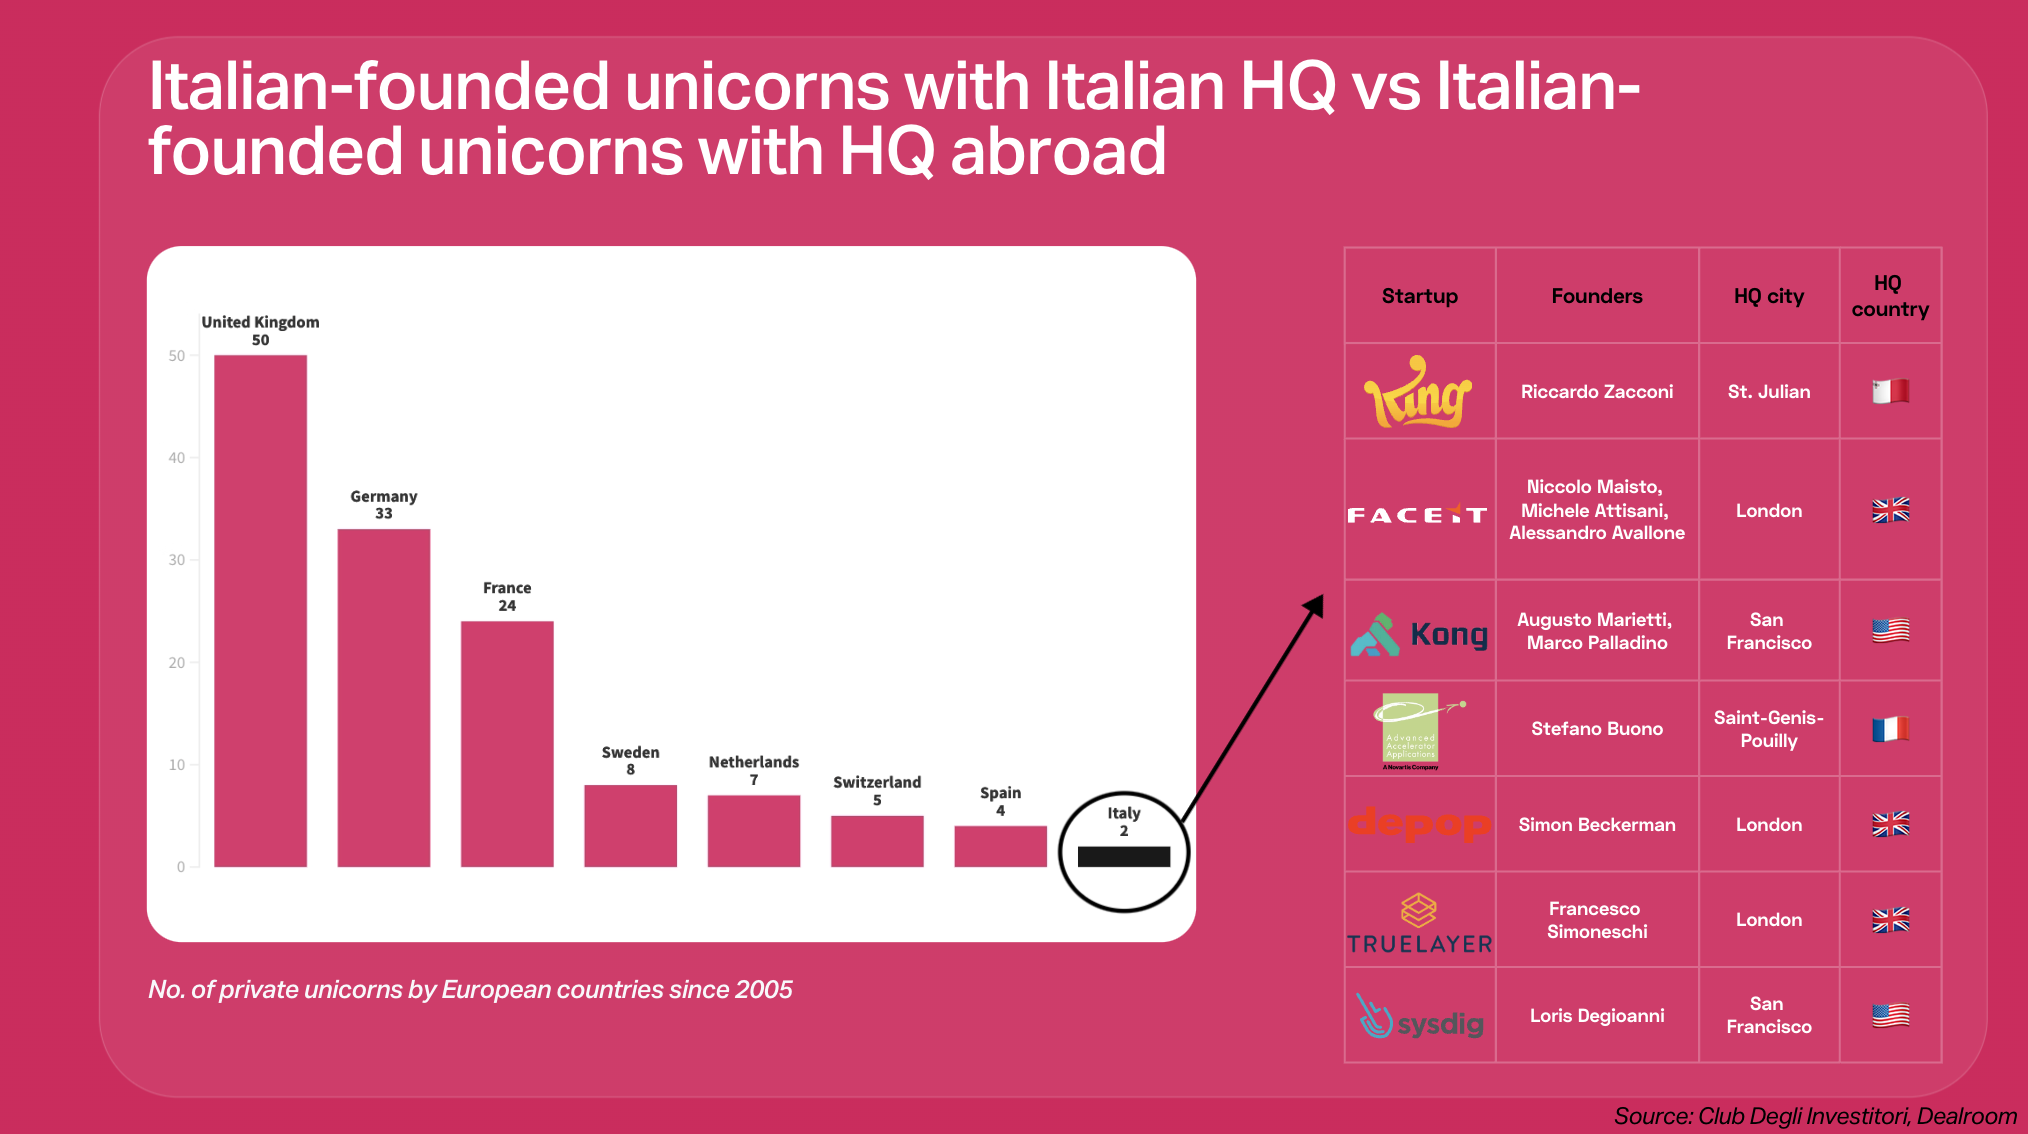 Chart showing the number of Italian-founded unicorns with an Italian HQ, vs Italian-founded unicorns with their HQ abroad.